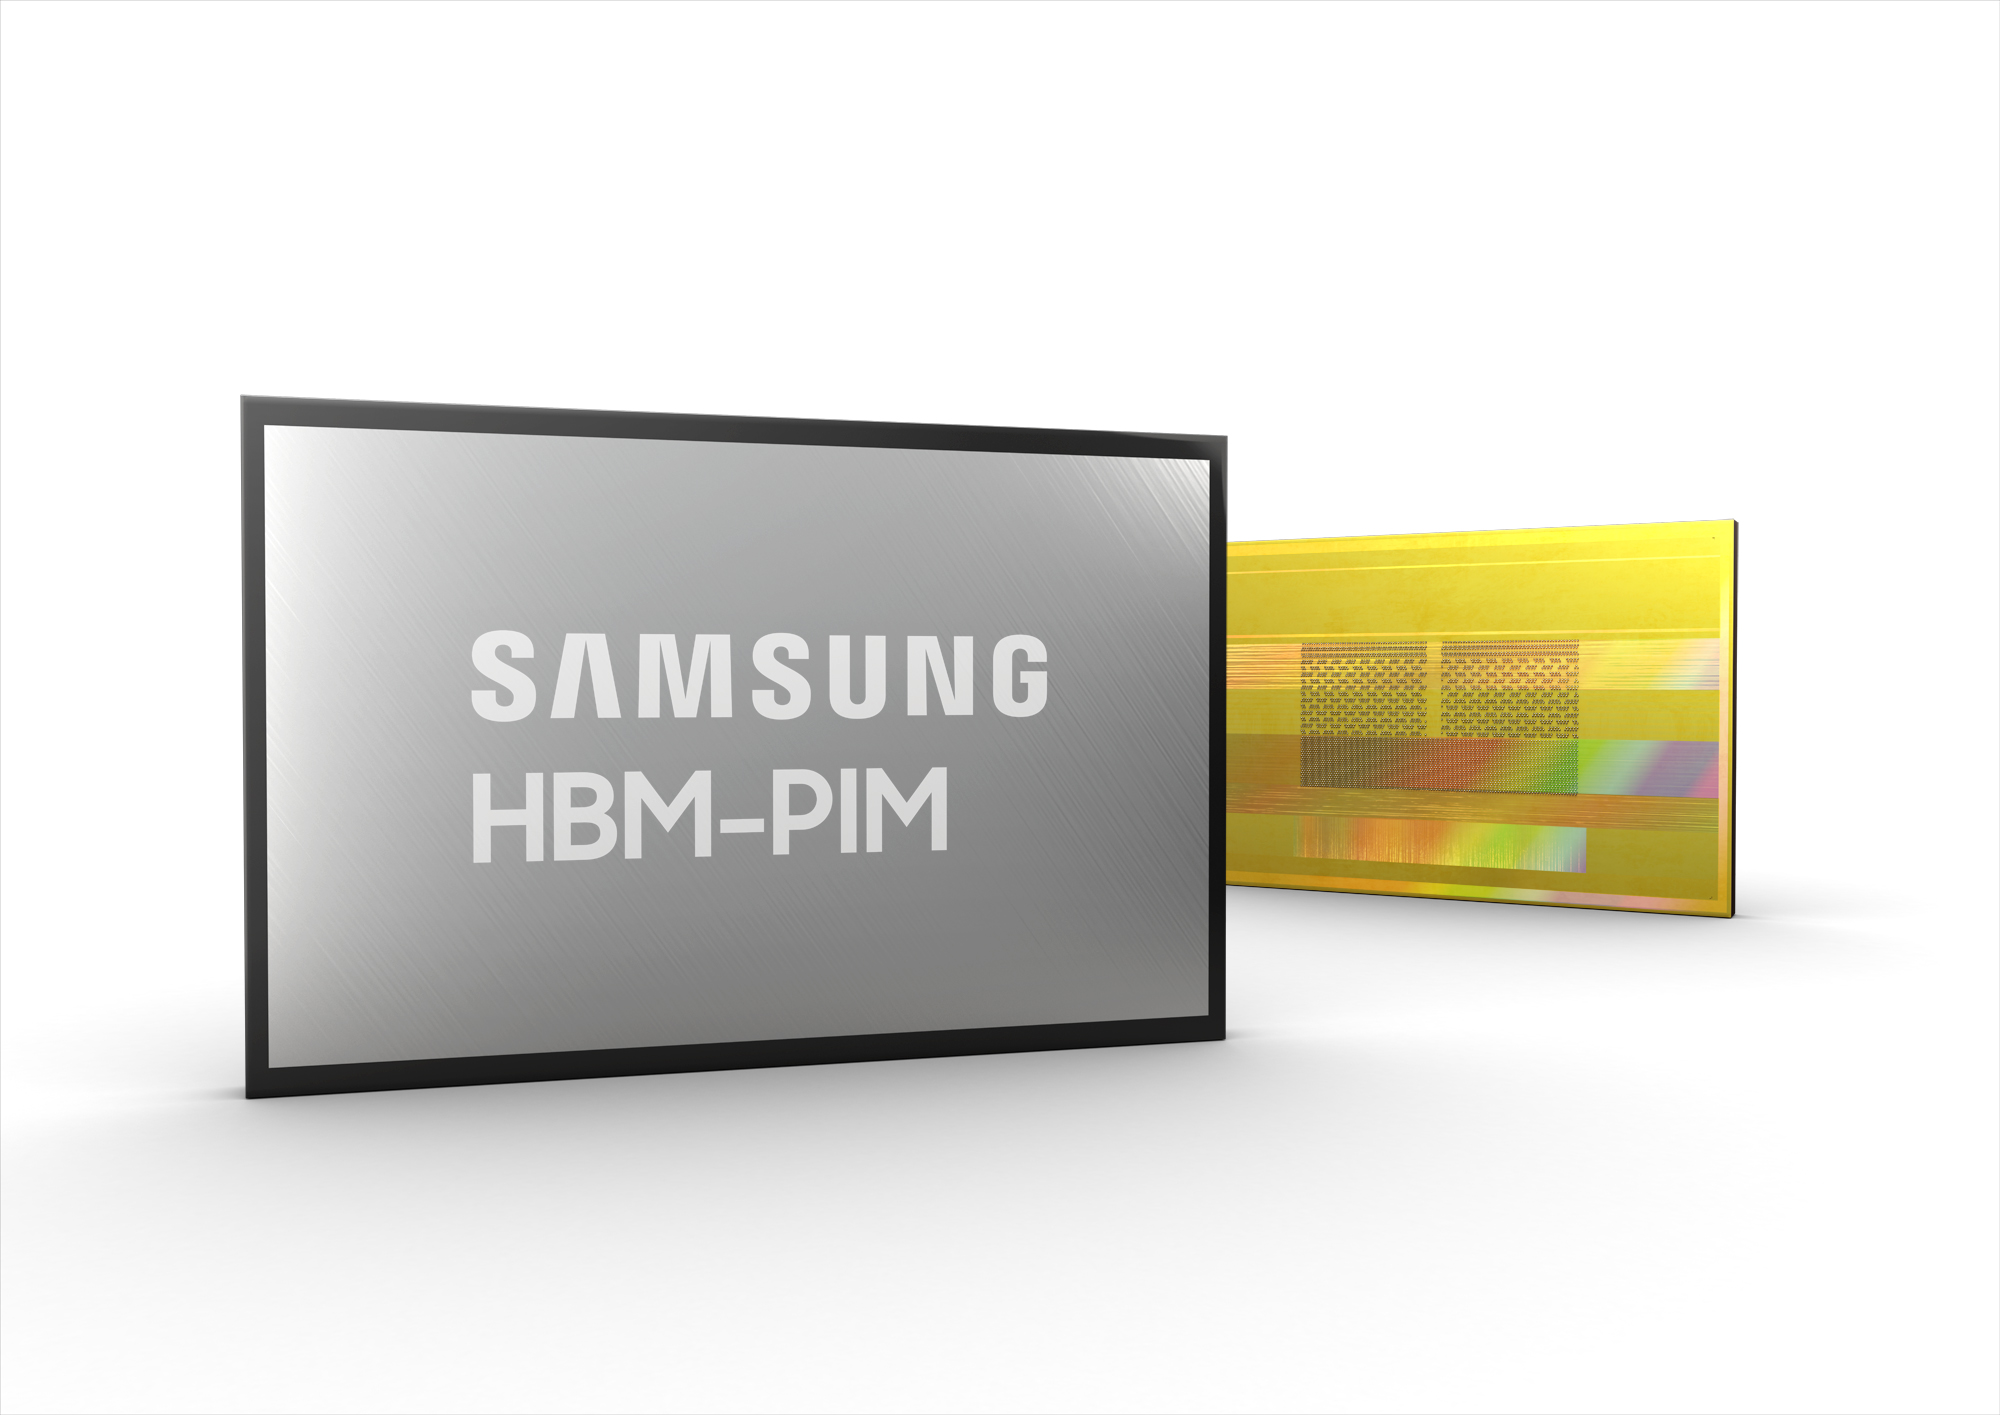 Samsung's New HBM2 Memory Has 1.2 TFLOPS of Embedded Processing